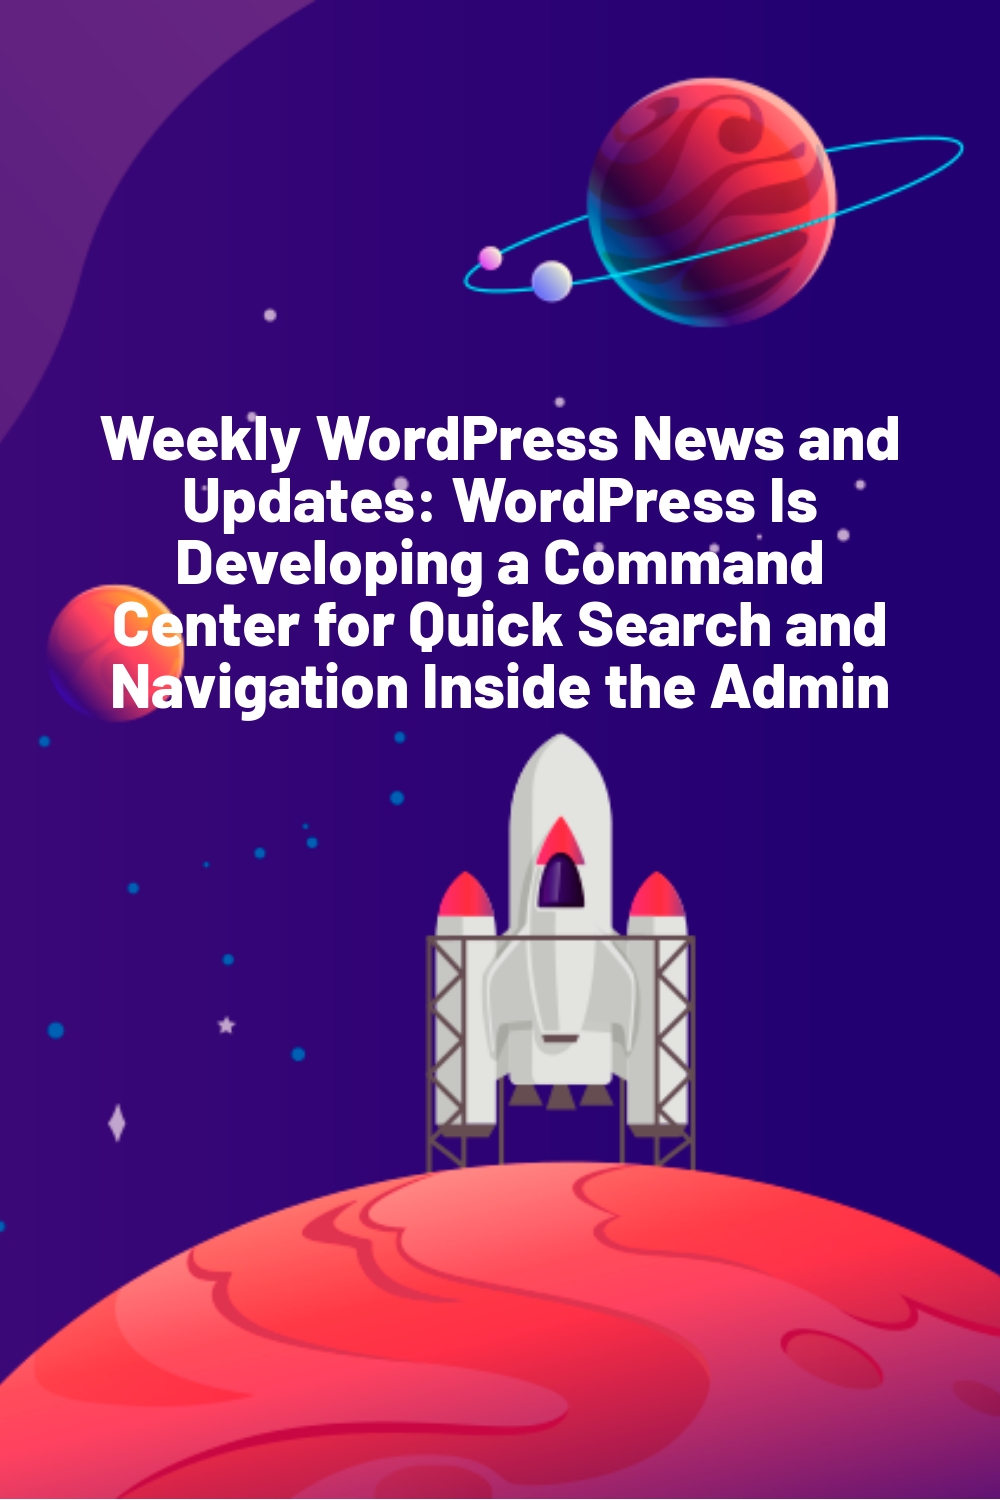 Weekly WordPress News and Updates: WordPress Is Developing a Command Center for Quick Search and Navigation Inside the Admin